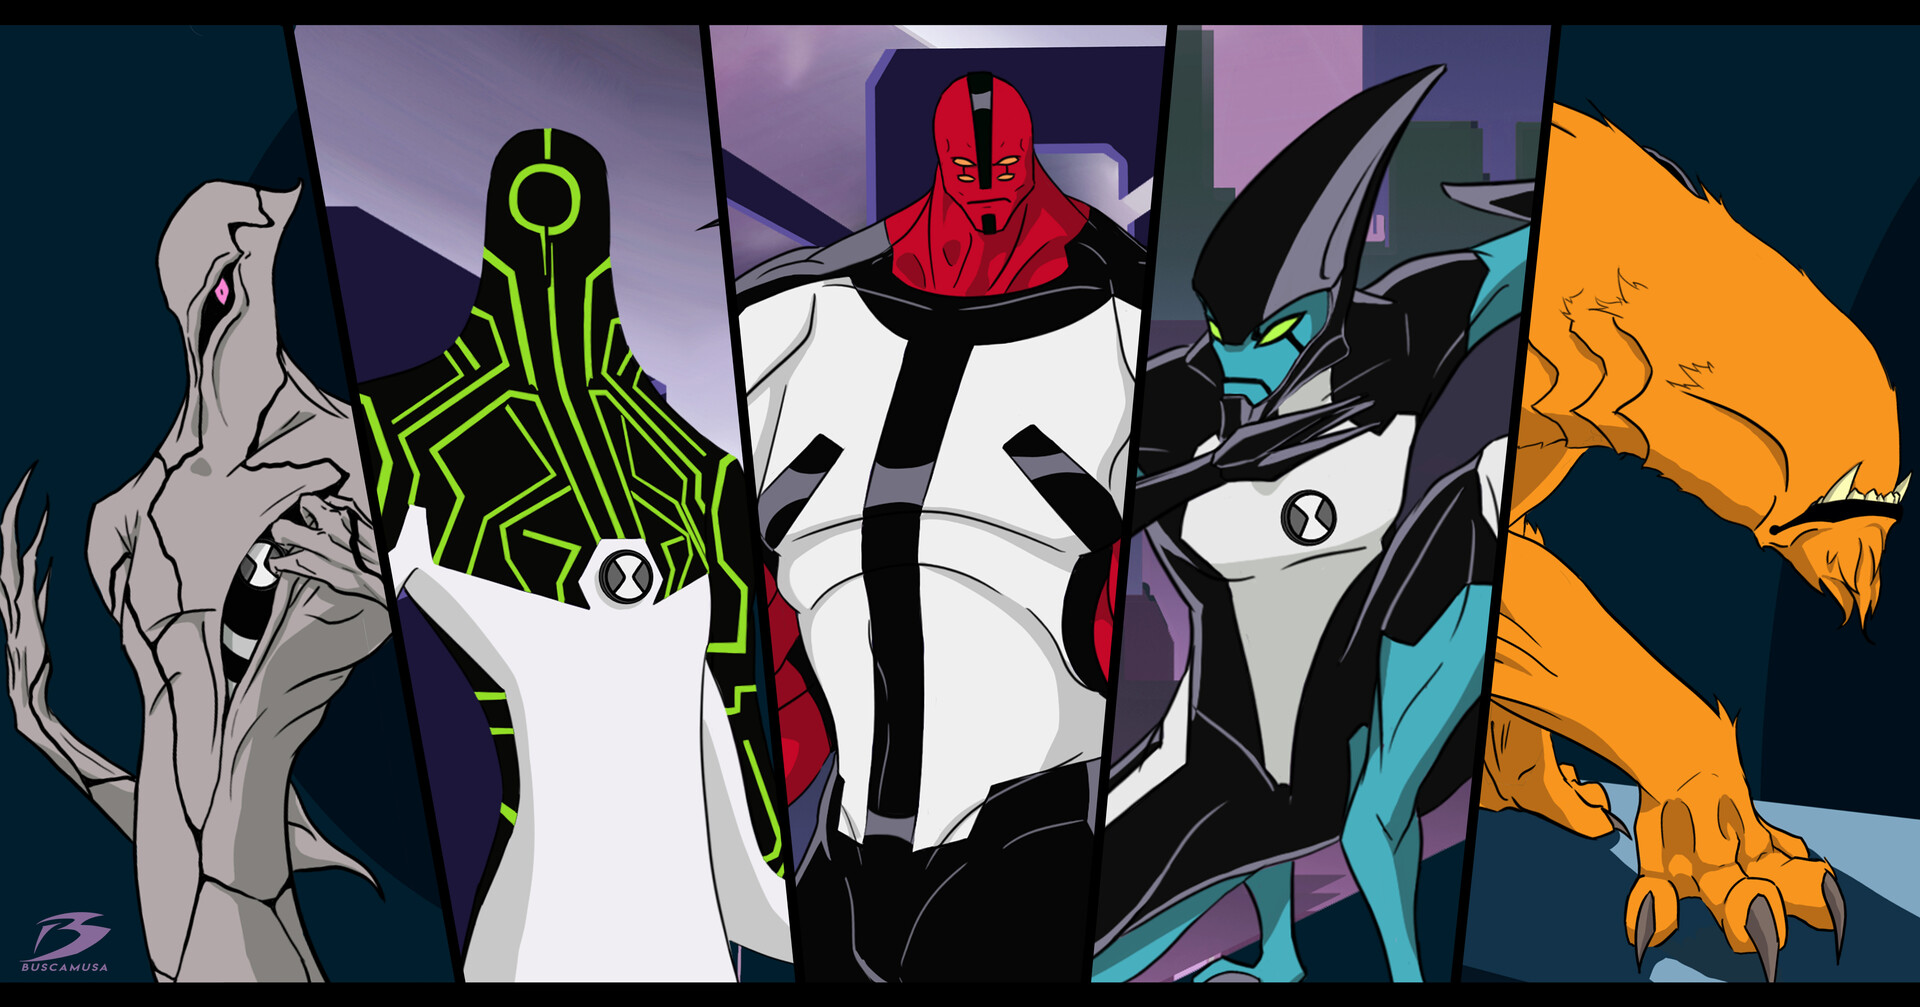 Here's all my Ben 10 classic looking reboot aliens compared to the